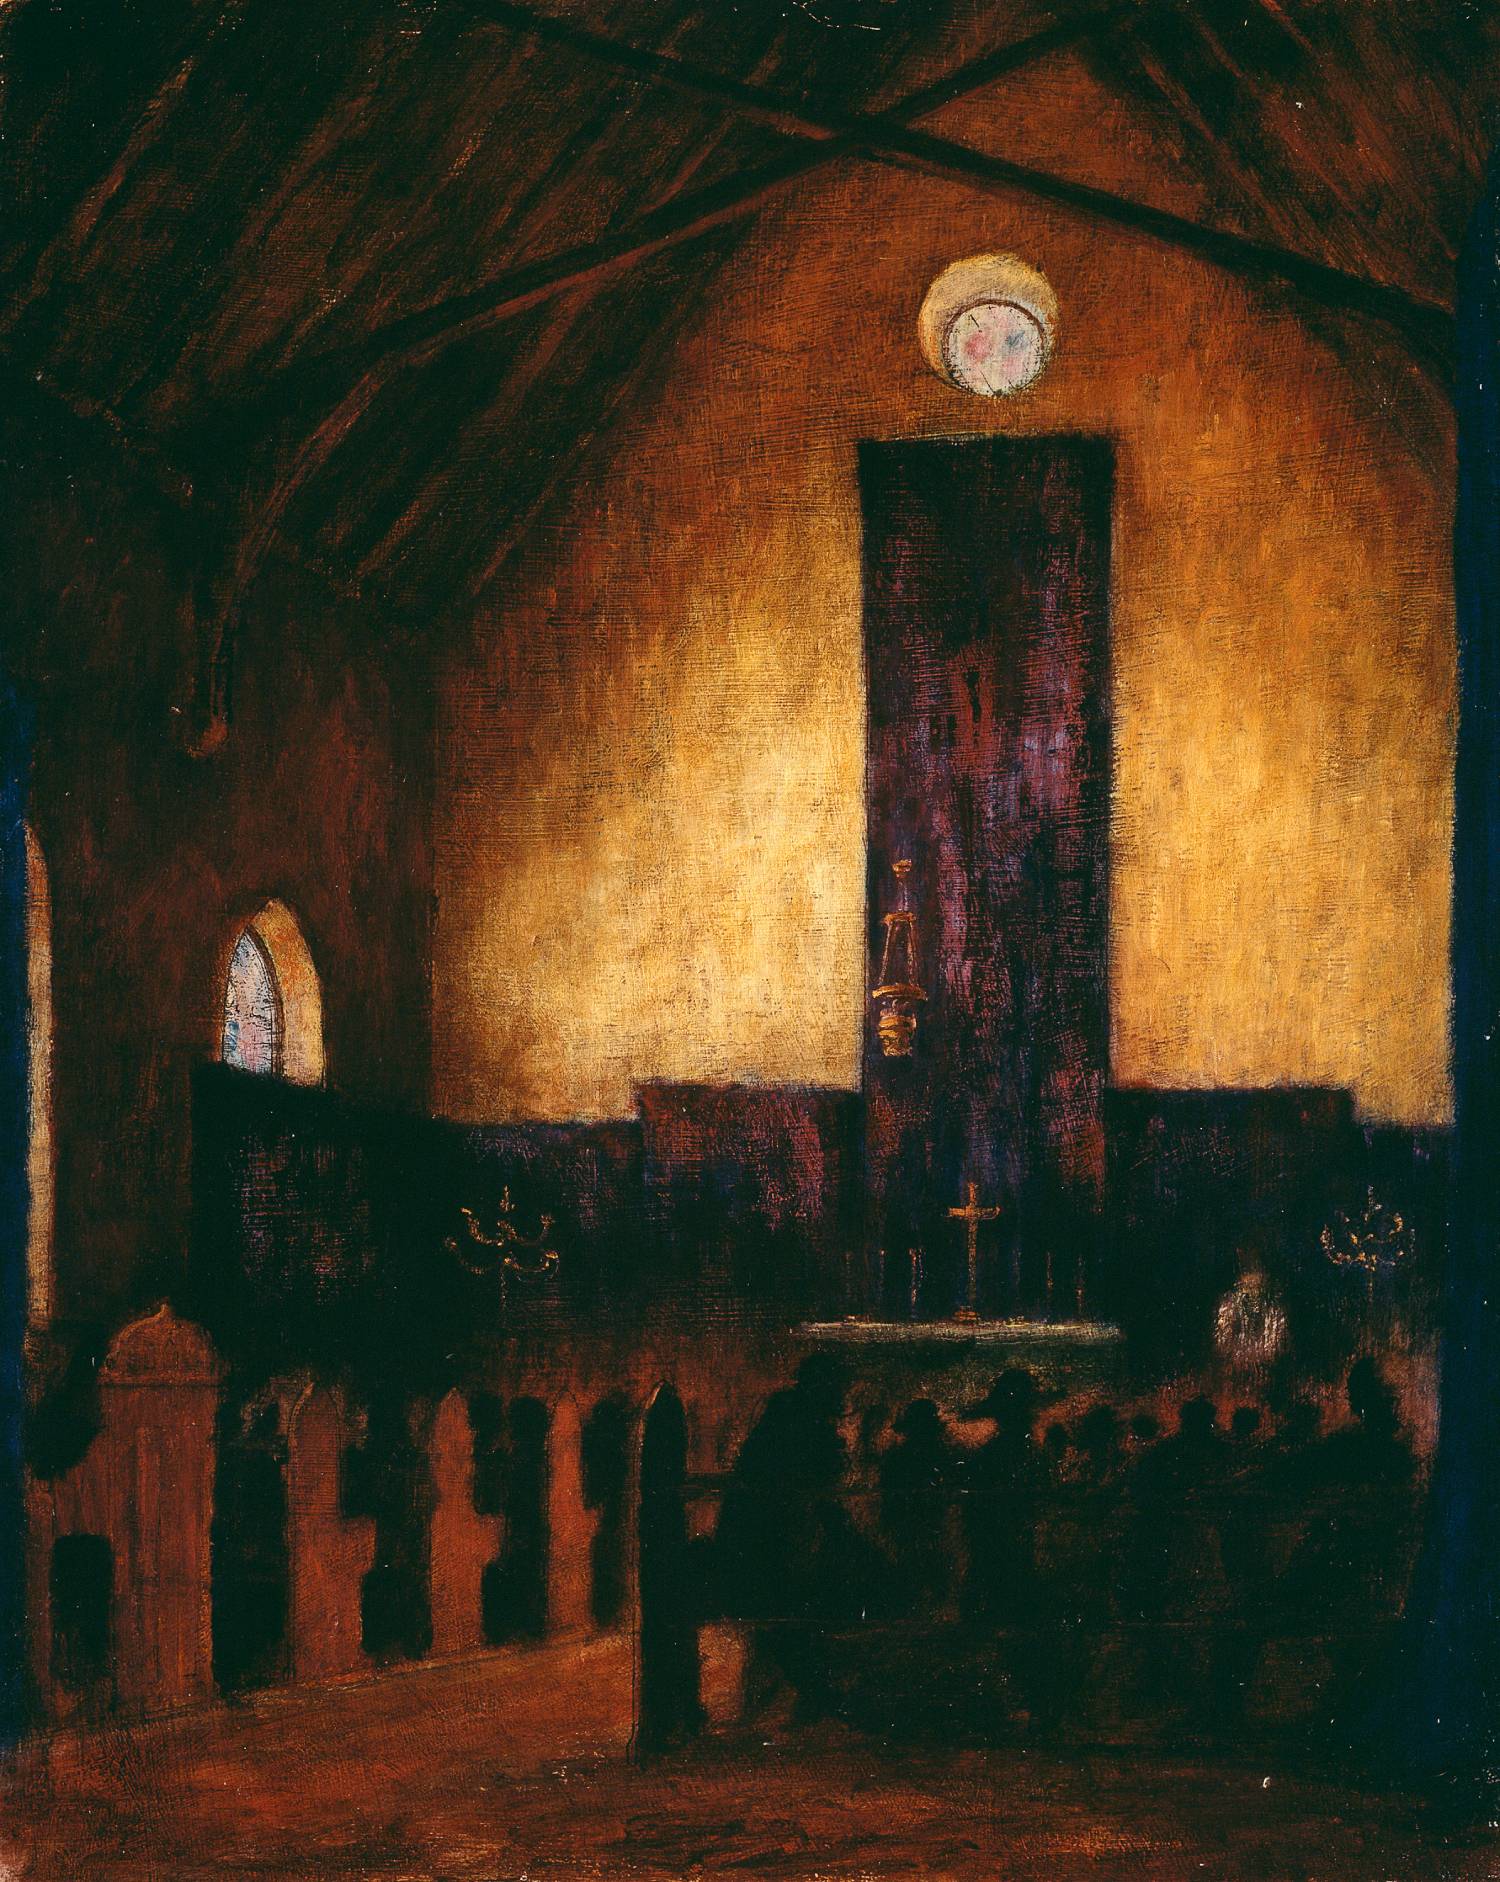 An oil painting of a church interior.